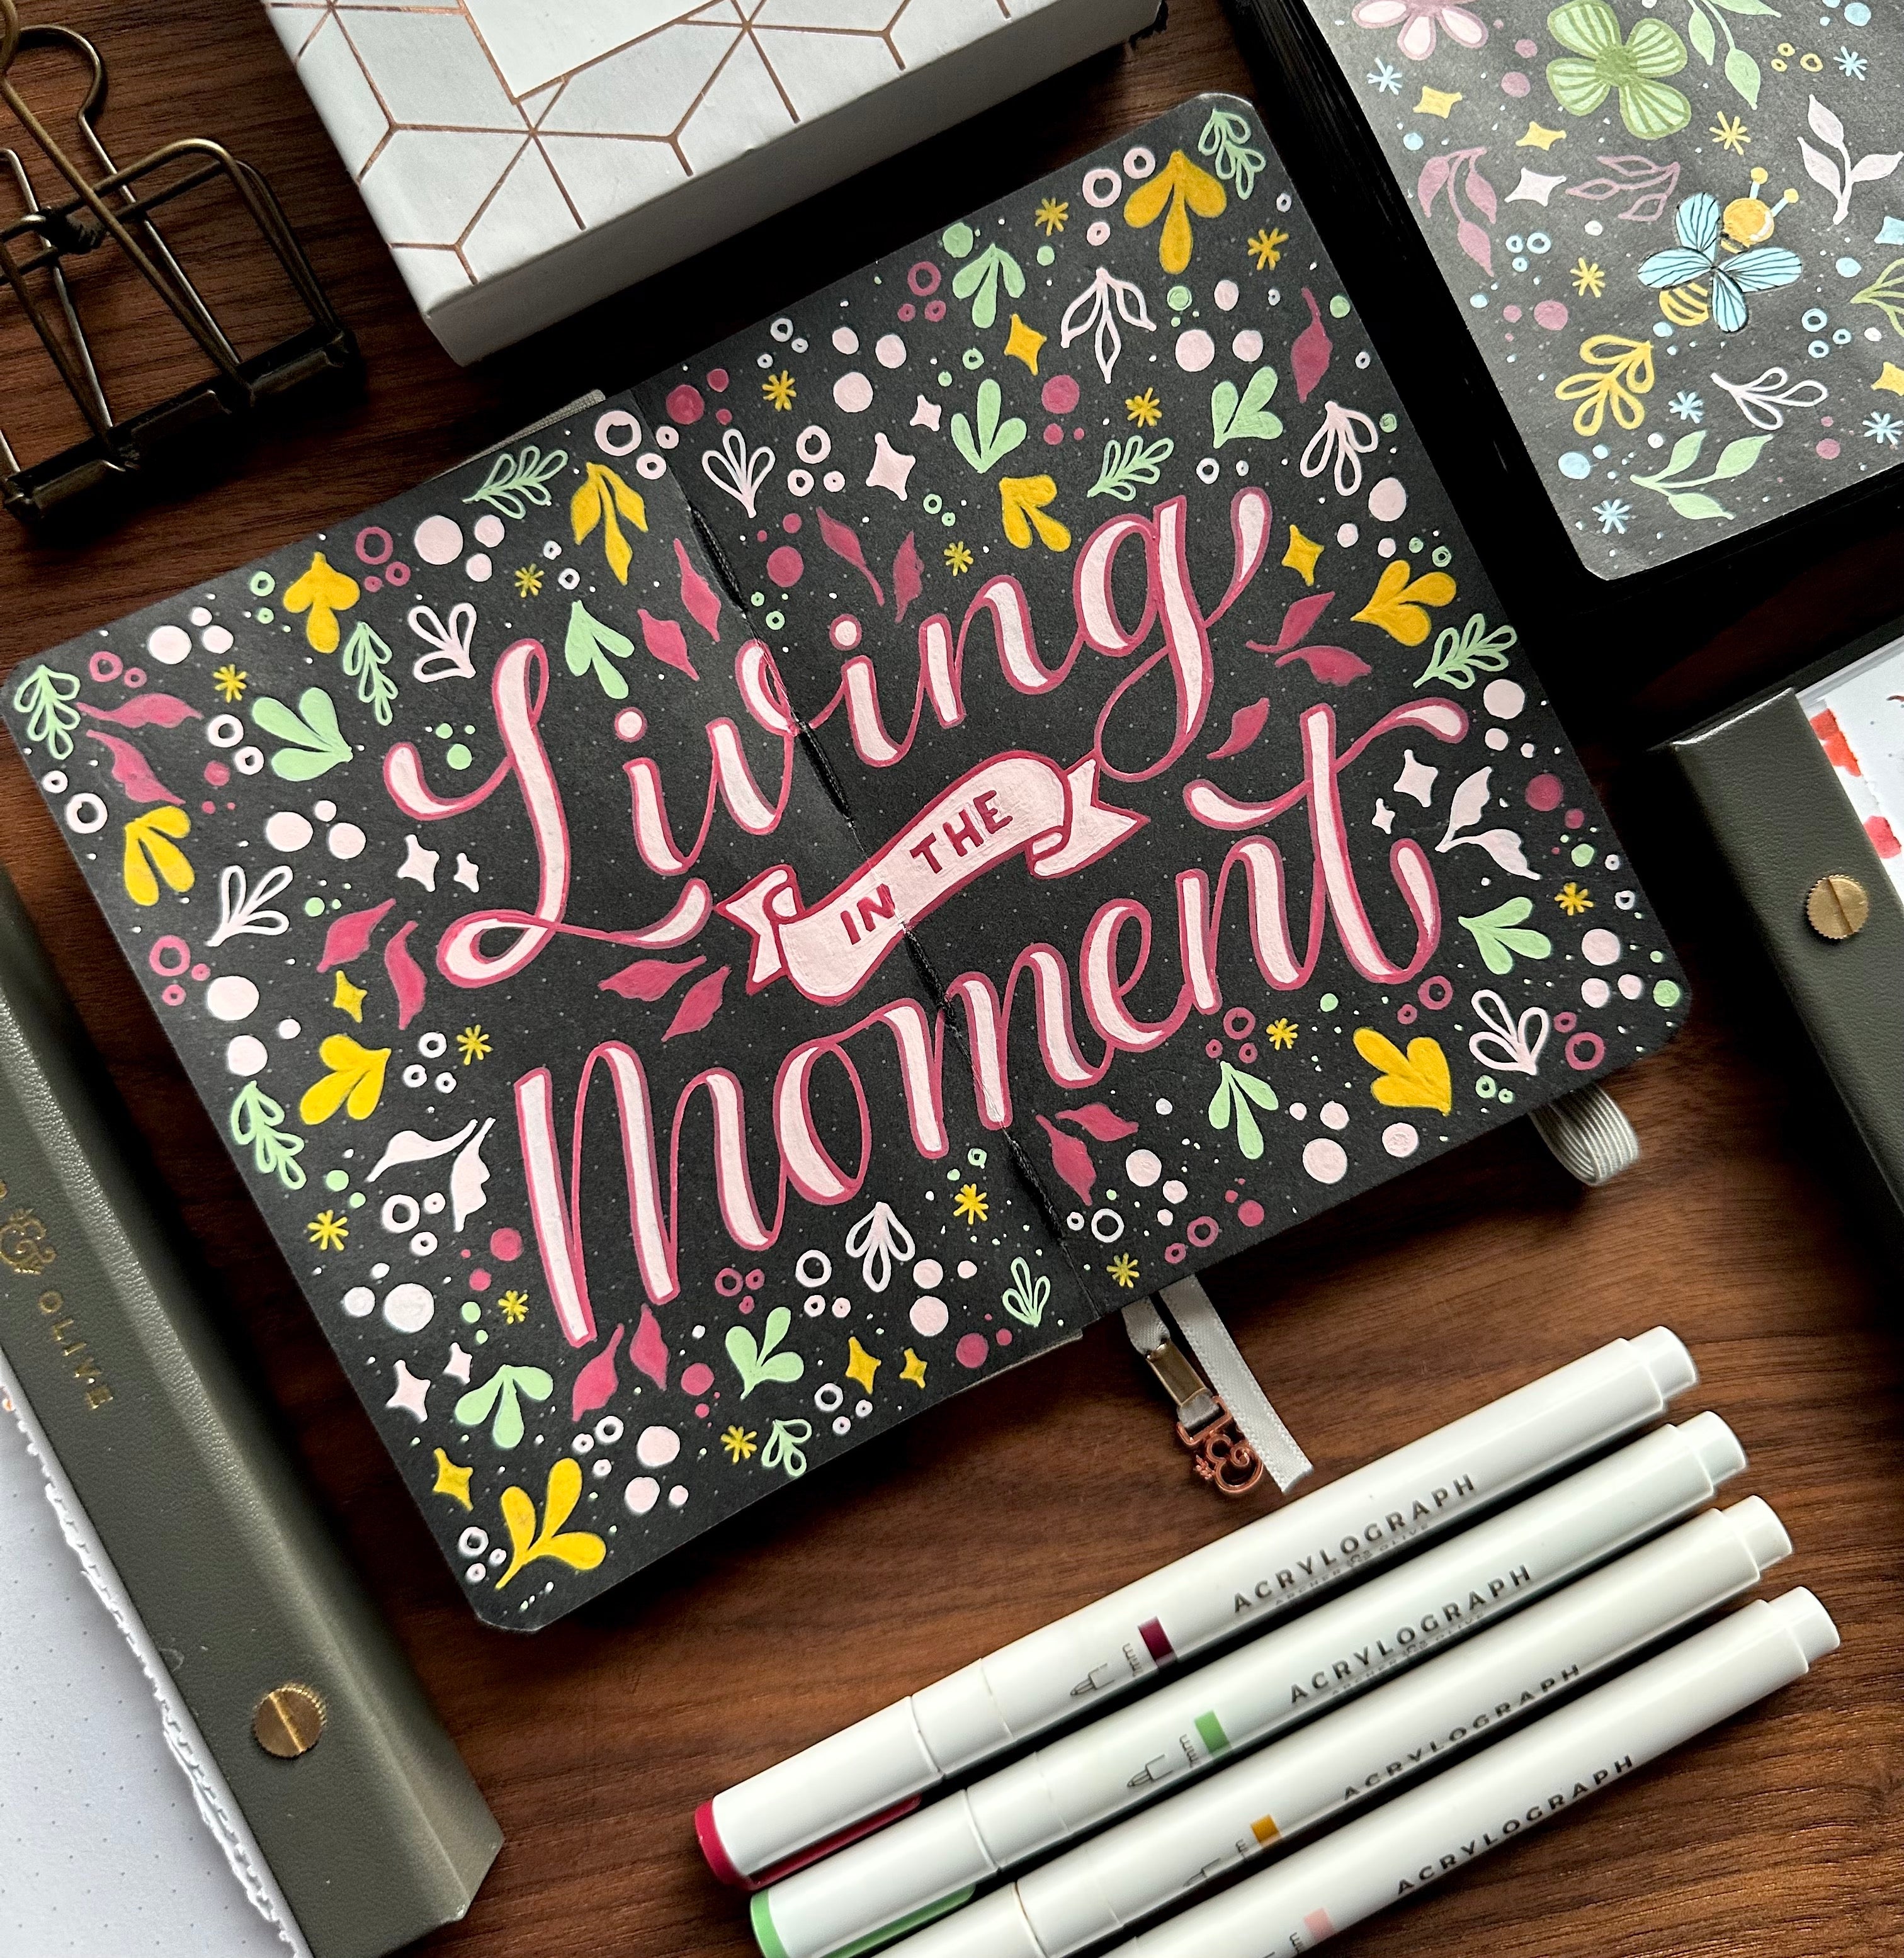 Keeping A Daily Creative Journal as a Companion and Creative Portal + Free  Lettering Worksheets